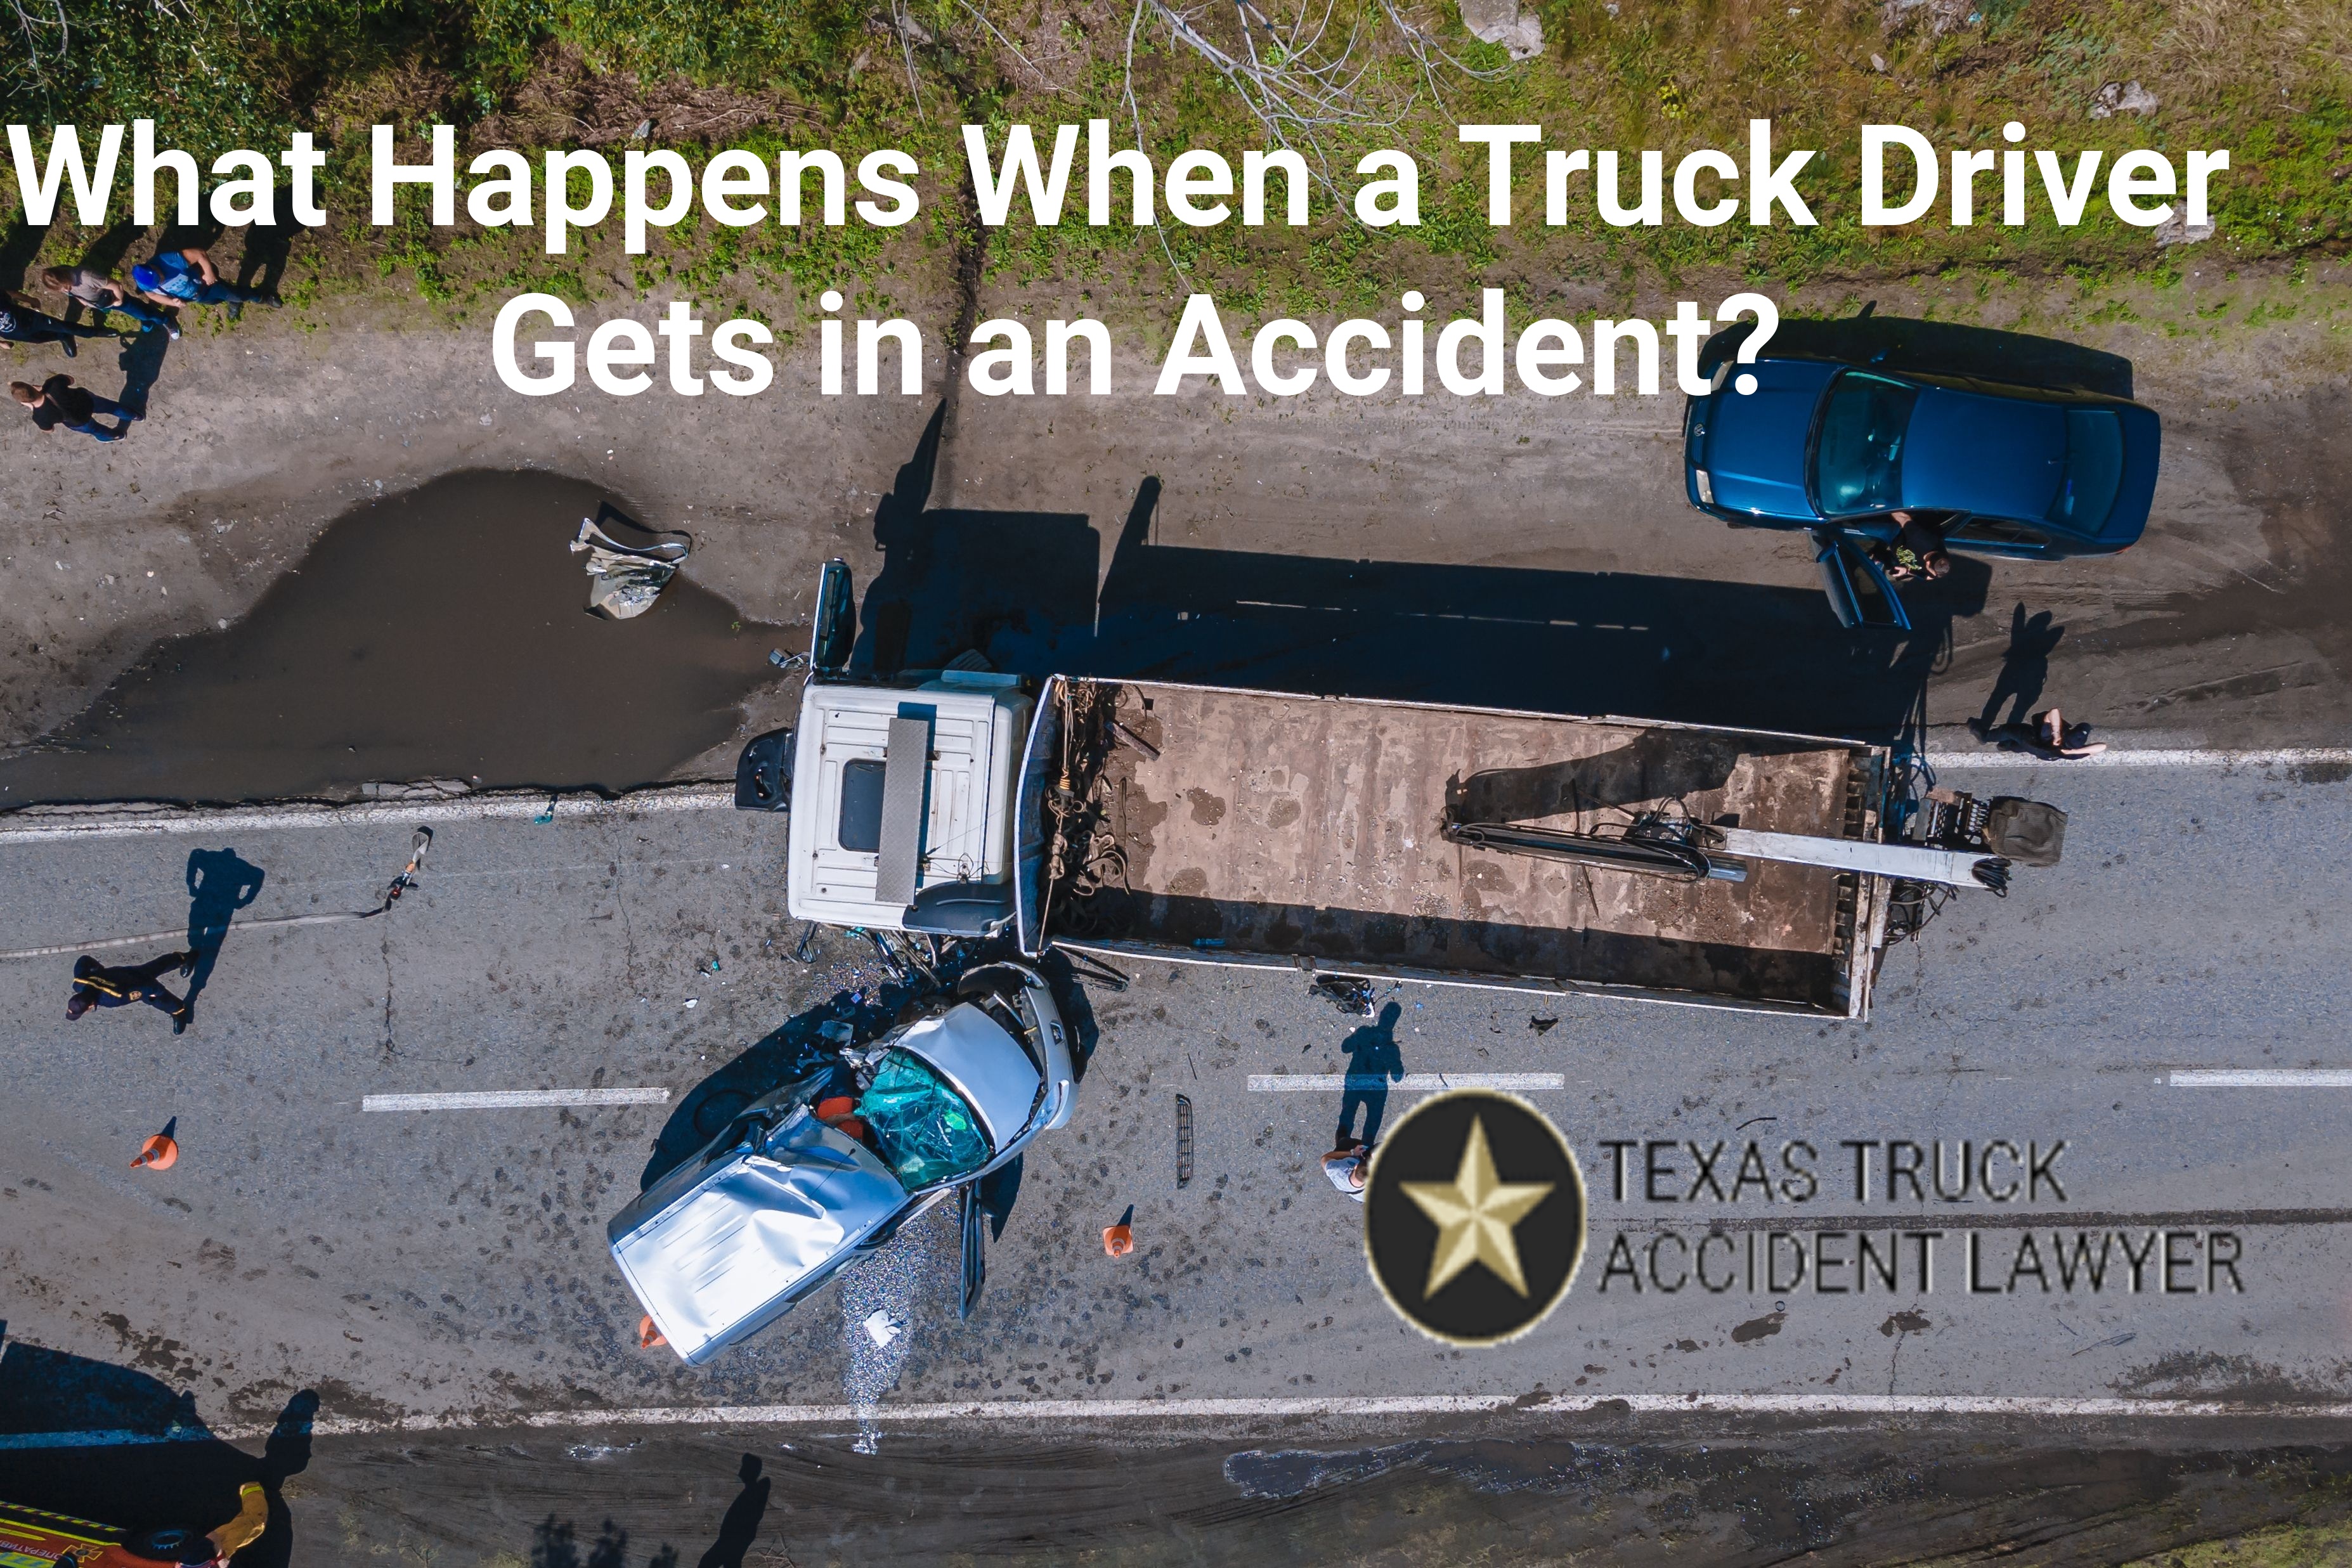 What happens when a truck driver gets in an accident?